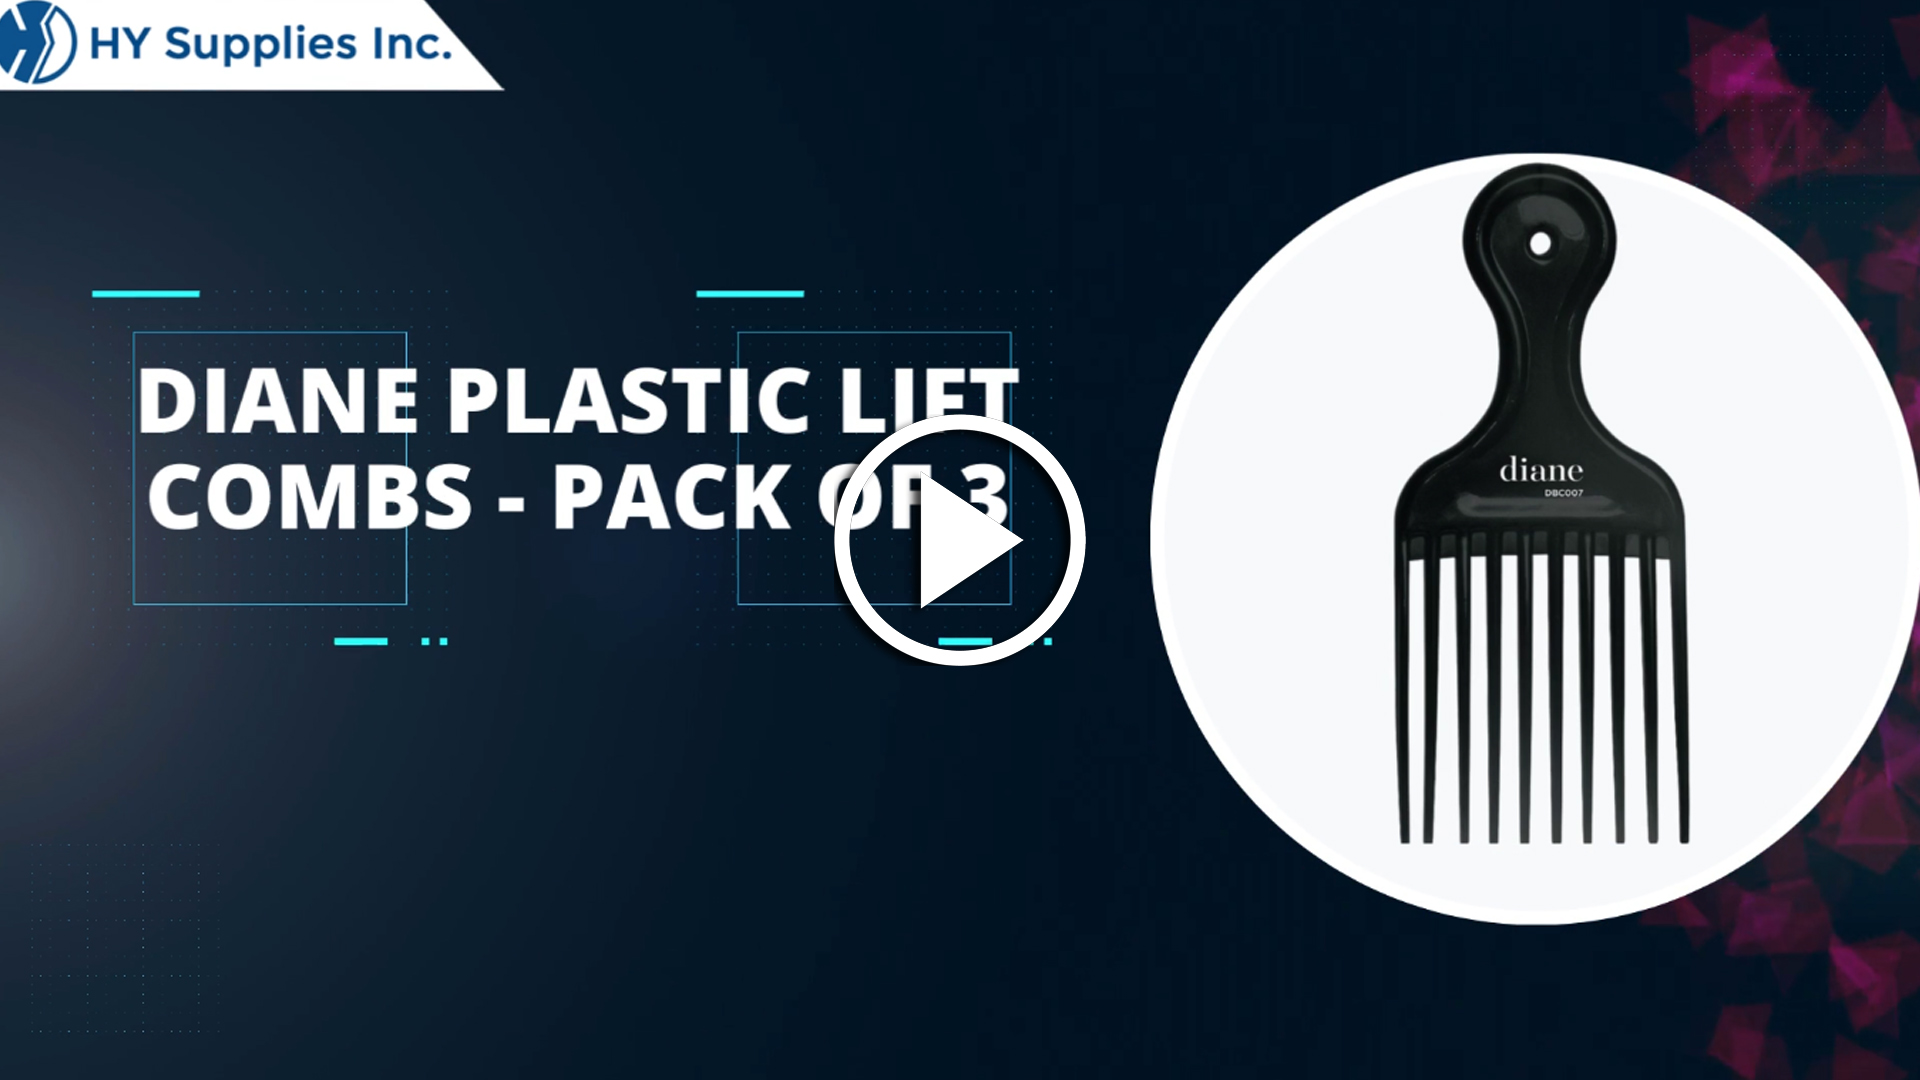 Diane Plastic Lift Combs - Pack of 3